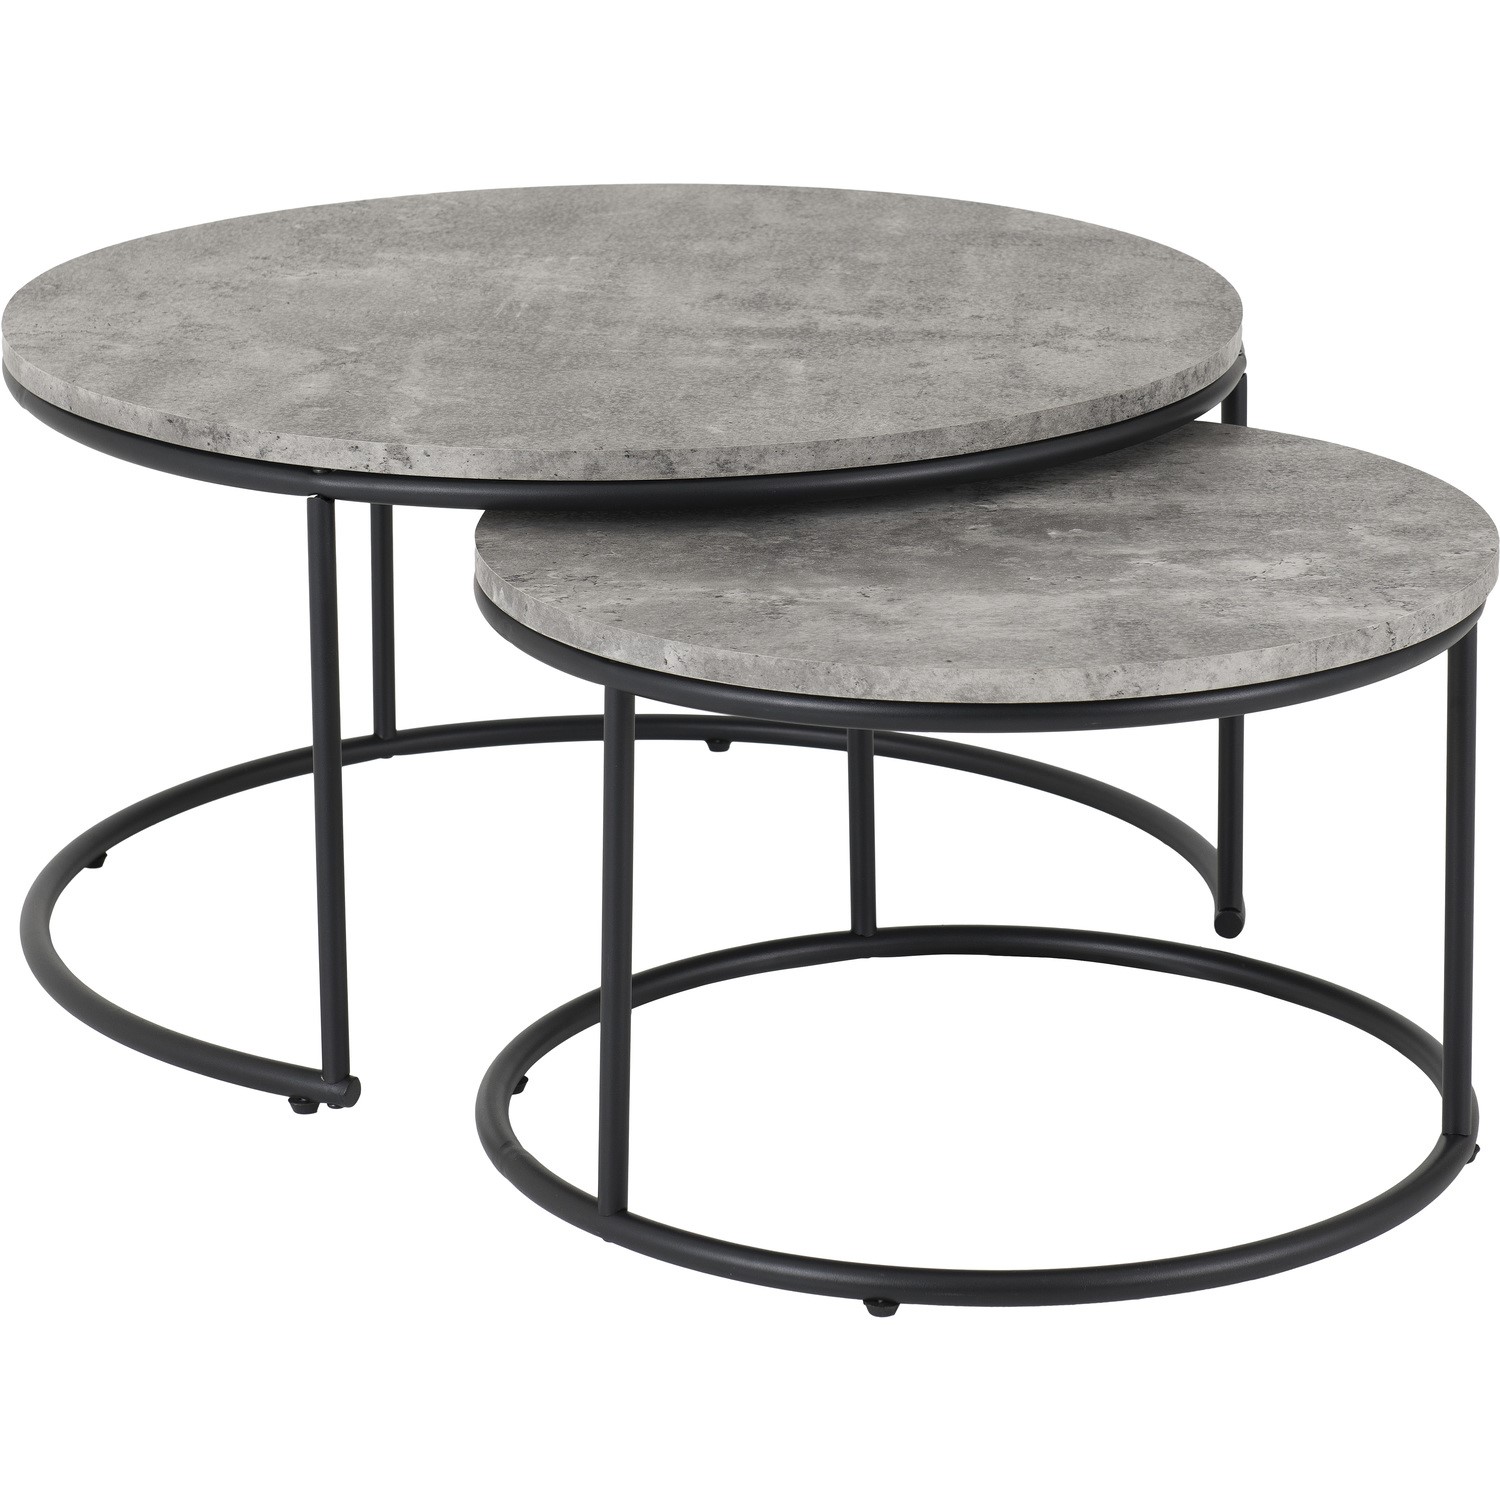 Photo of Small athens round coffee table set - concrete effect